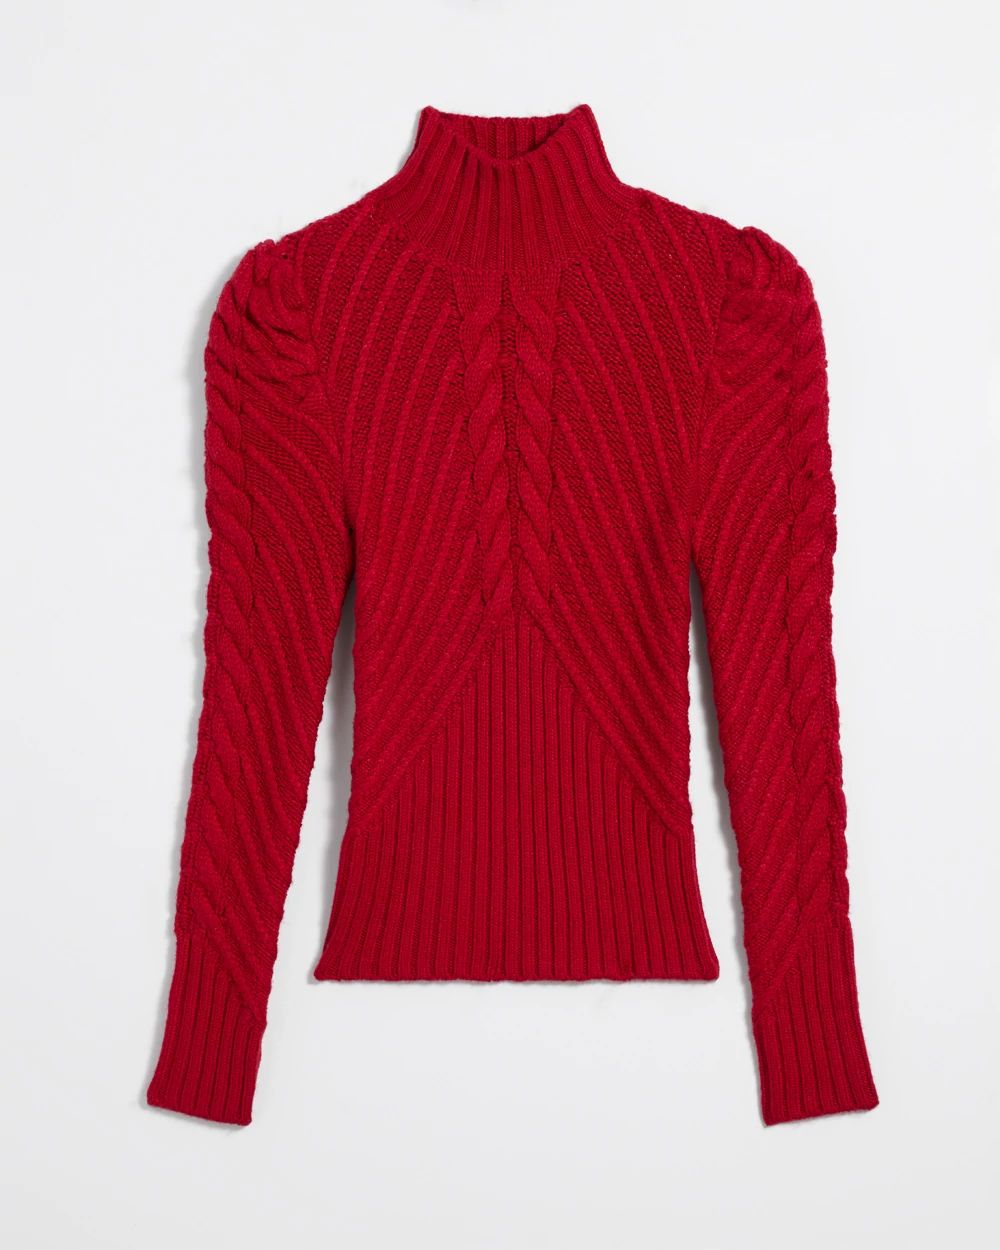 Petite Puff Sleeve Cable Mockneck Sweater click to view larger image.